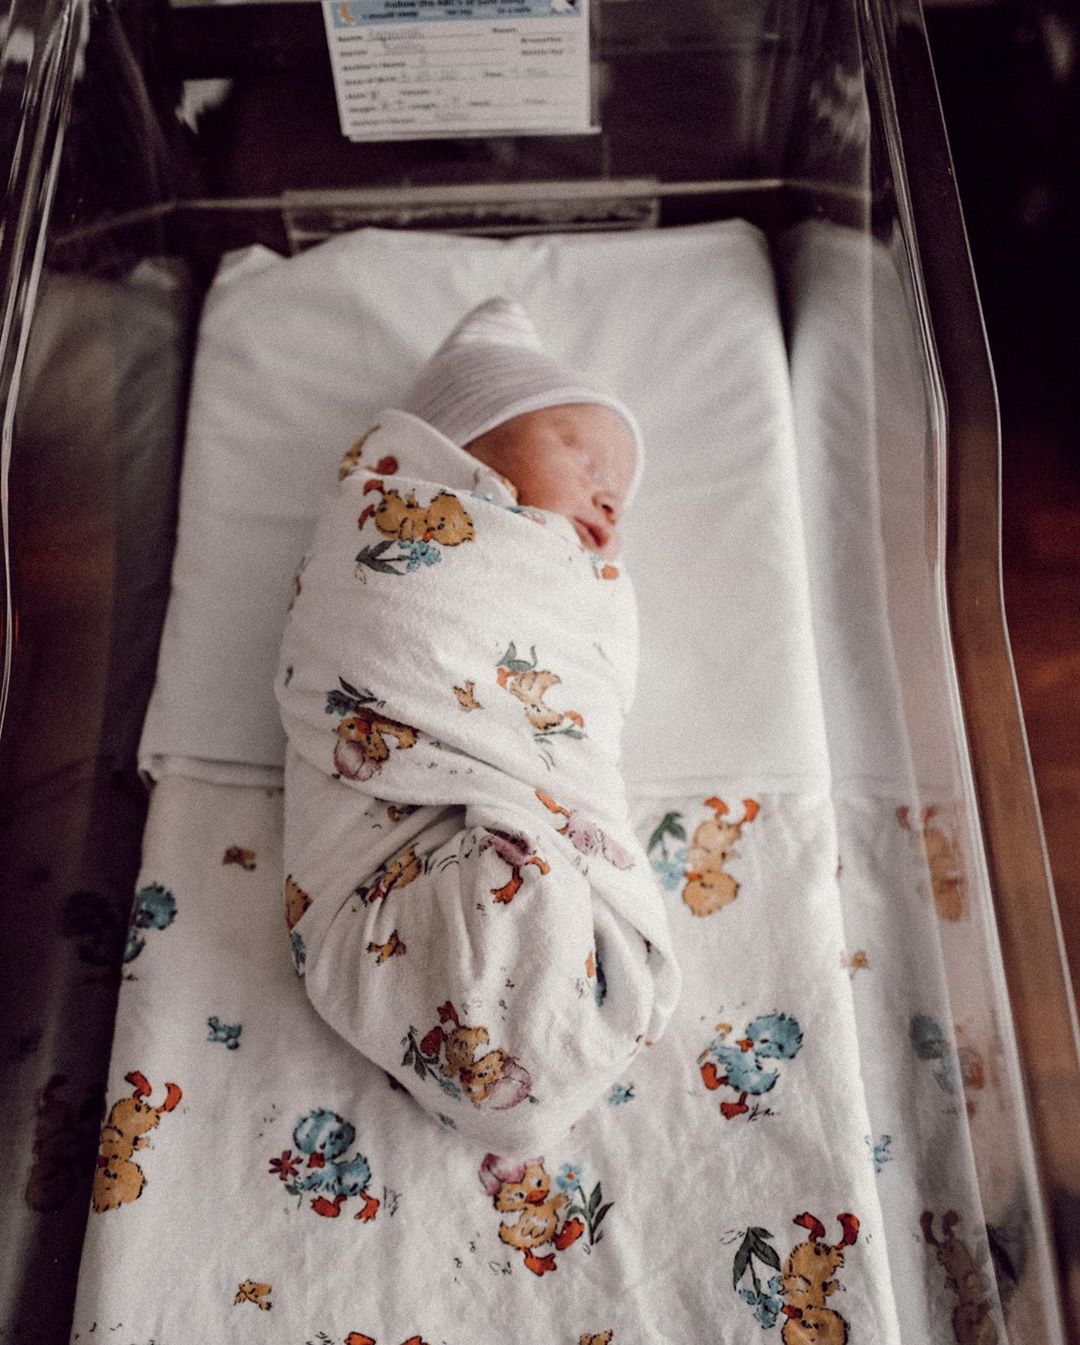 Hayes Andrew Hurd: Say Hello to Maren Morris and Ryan Hurd's 1st child 4